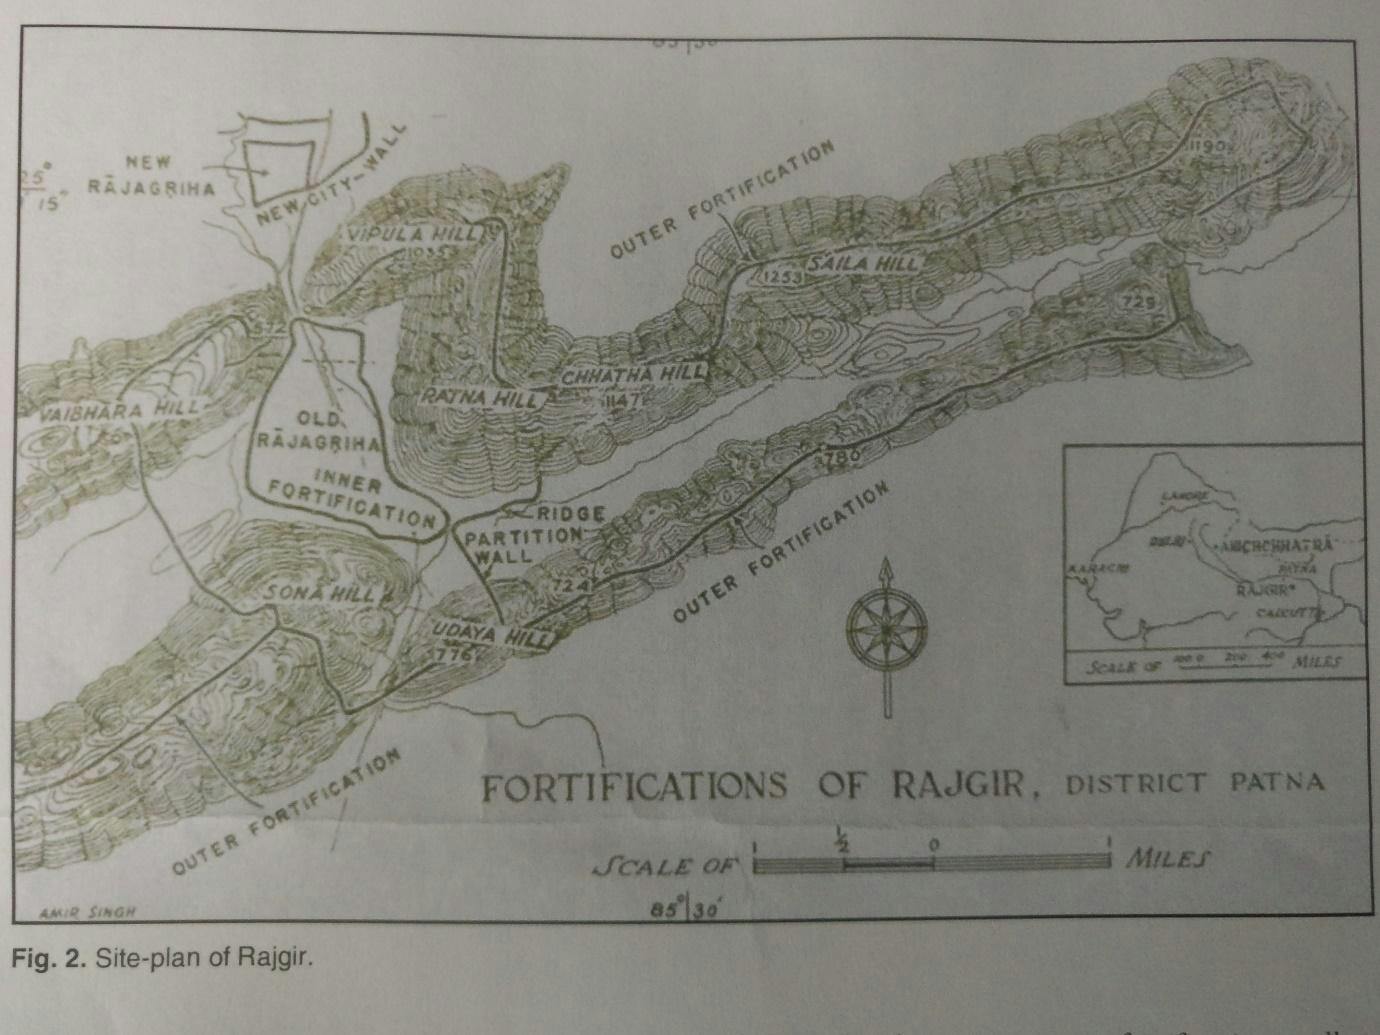 Map cited in ‘Rajgriha, B.R. Mani, in History of Ancient India, volume VII’